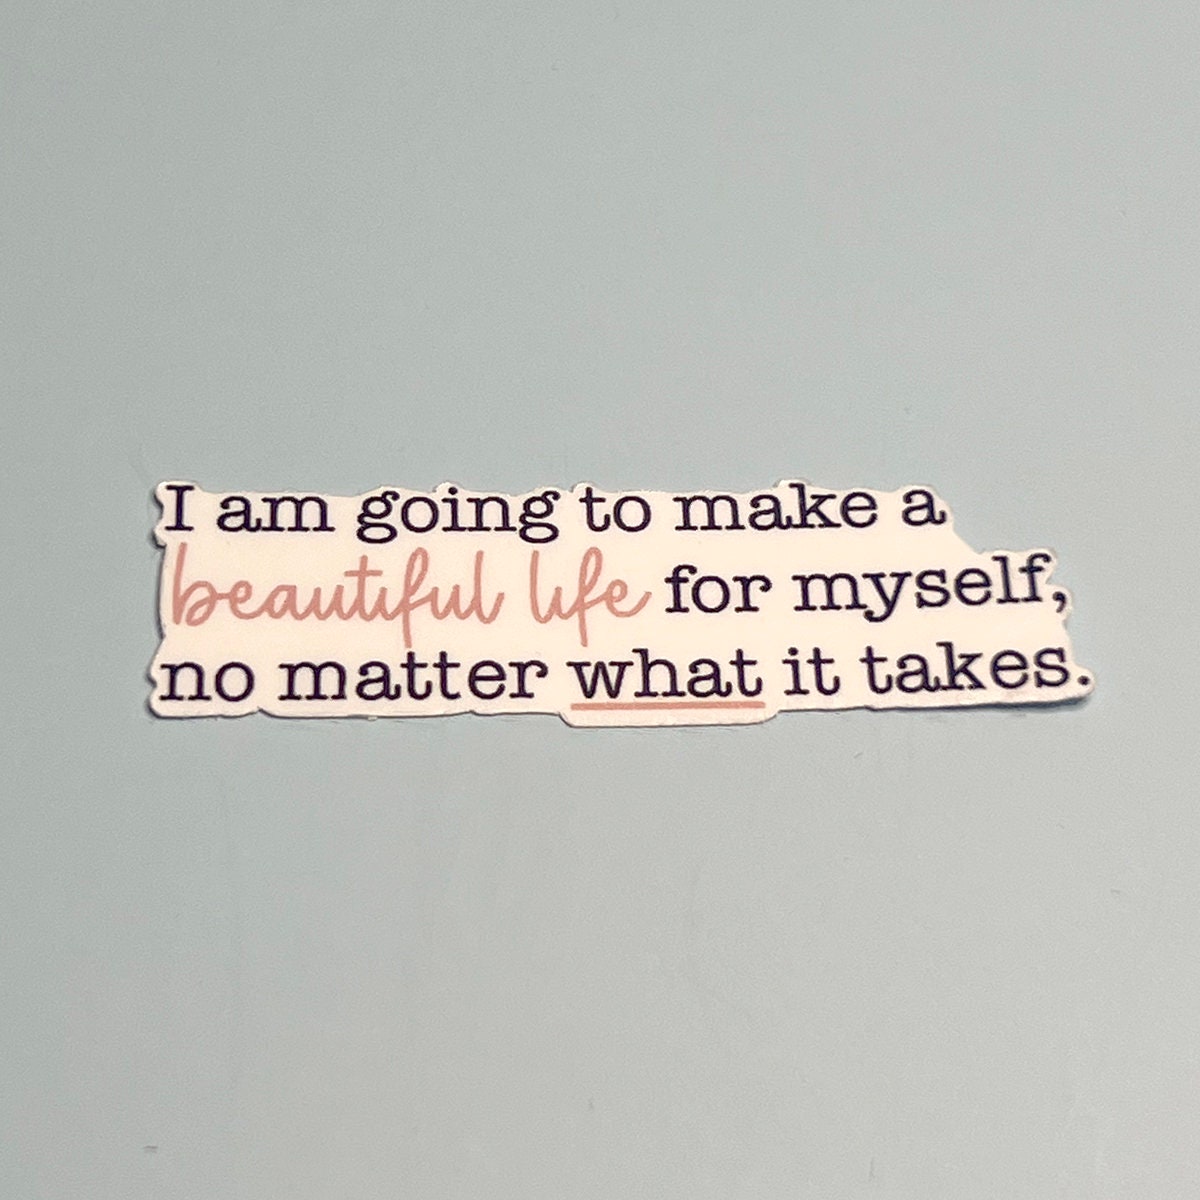 I am going to make a Beautiful Life for myself no matter what it takes - Waterproof Sticker